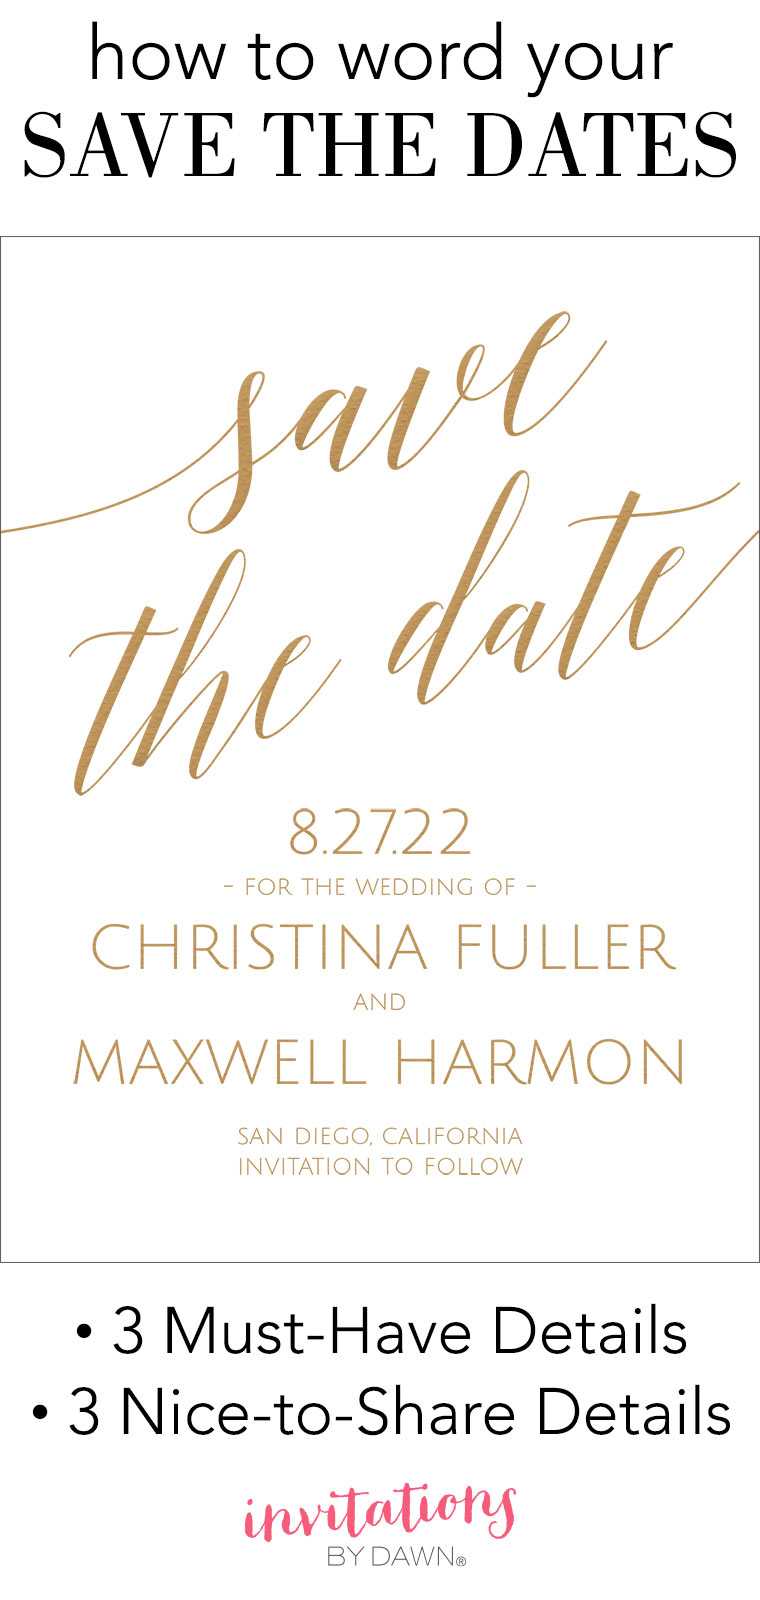 Save The Date Wording | Invitationsdawn With Regard To Save The Date Template Word